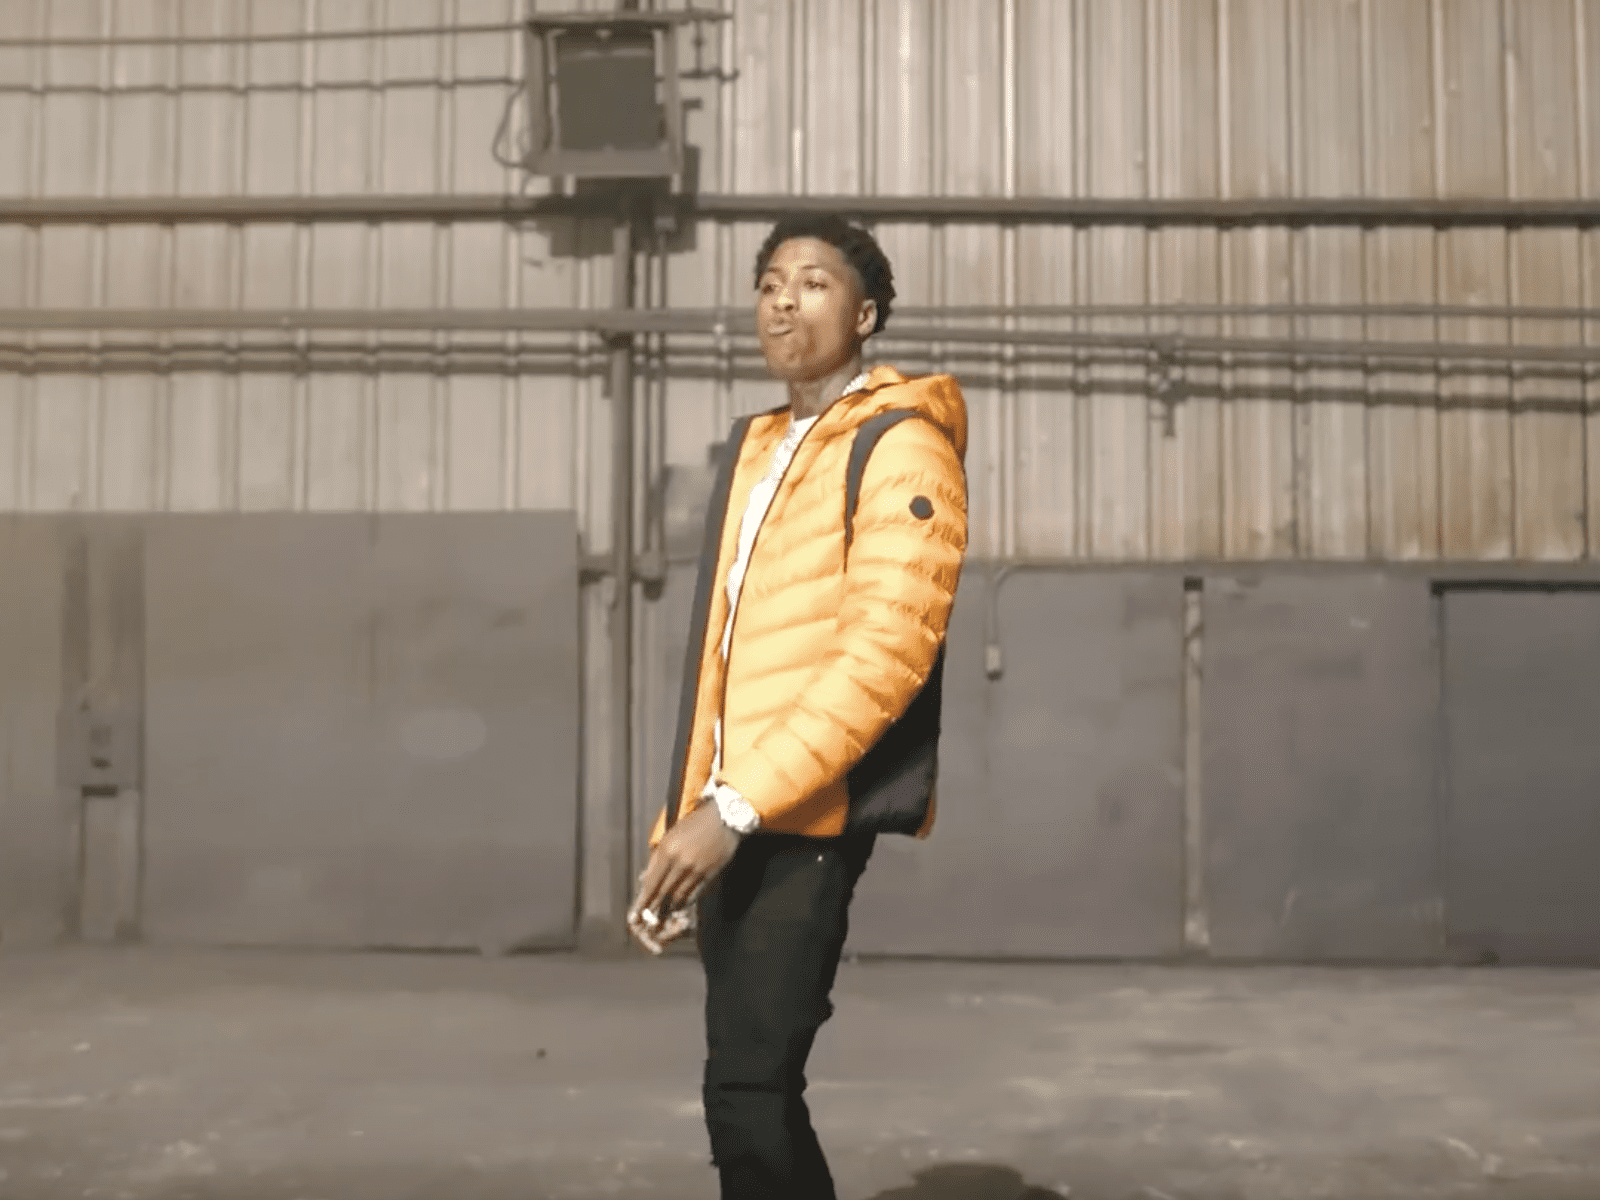 Watch: YoungBoy Never Broke Again Buckles Up In New LIL TOP Video